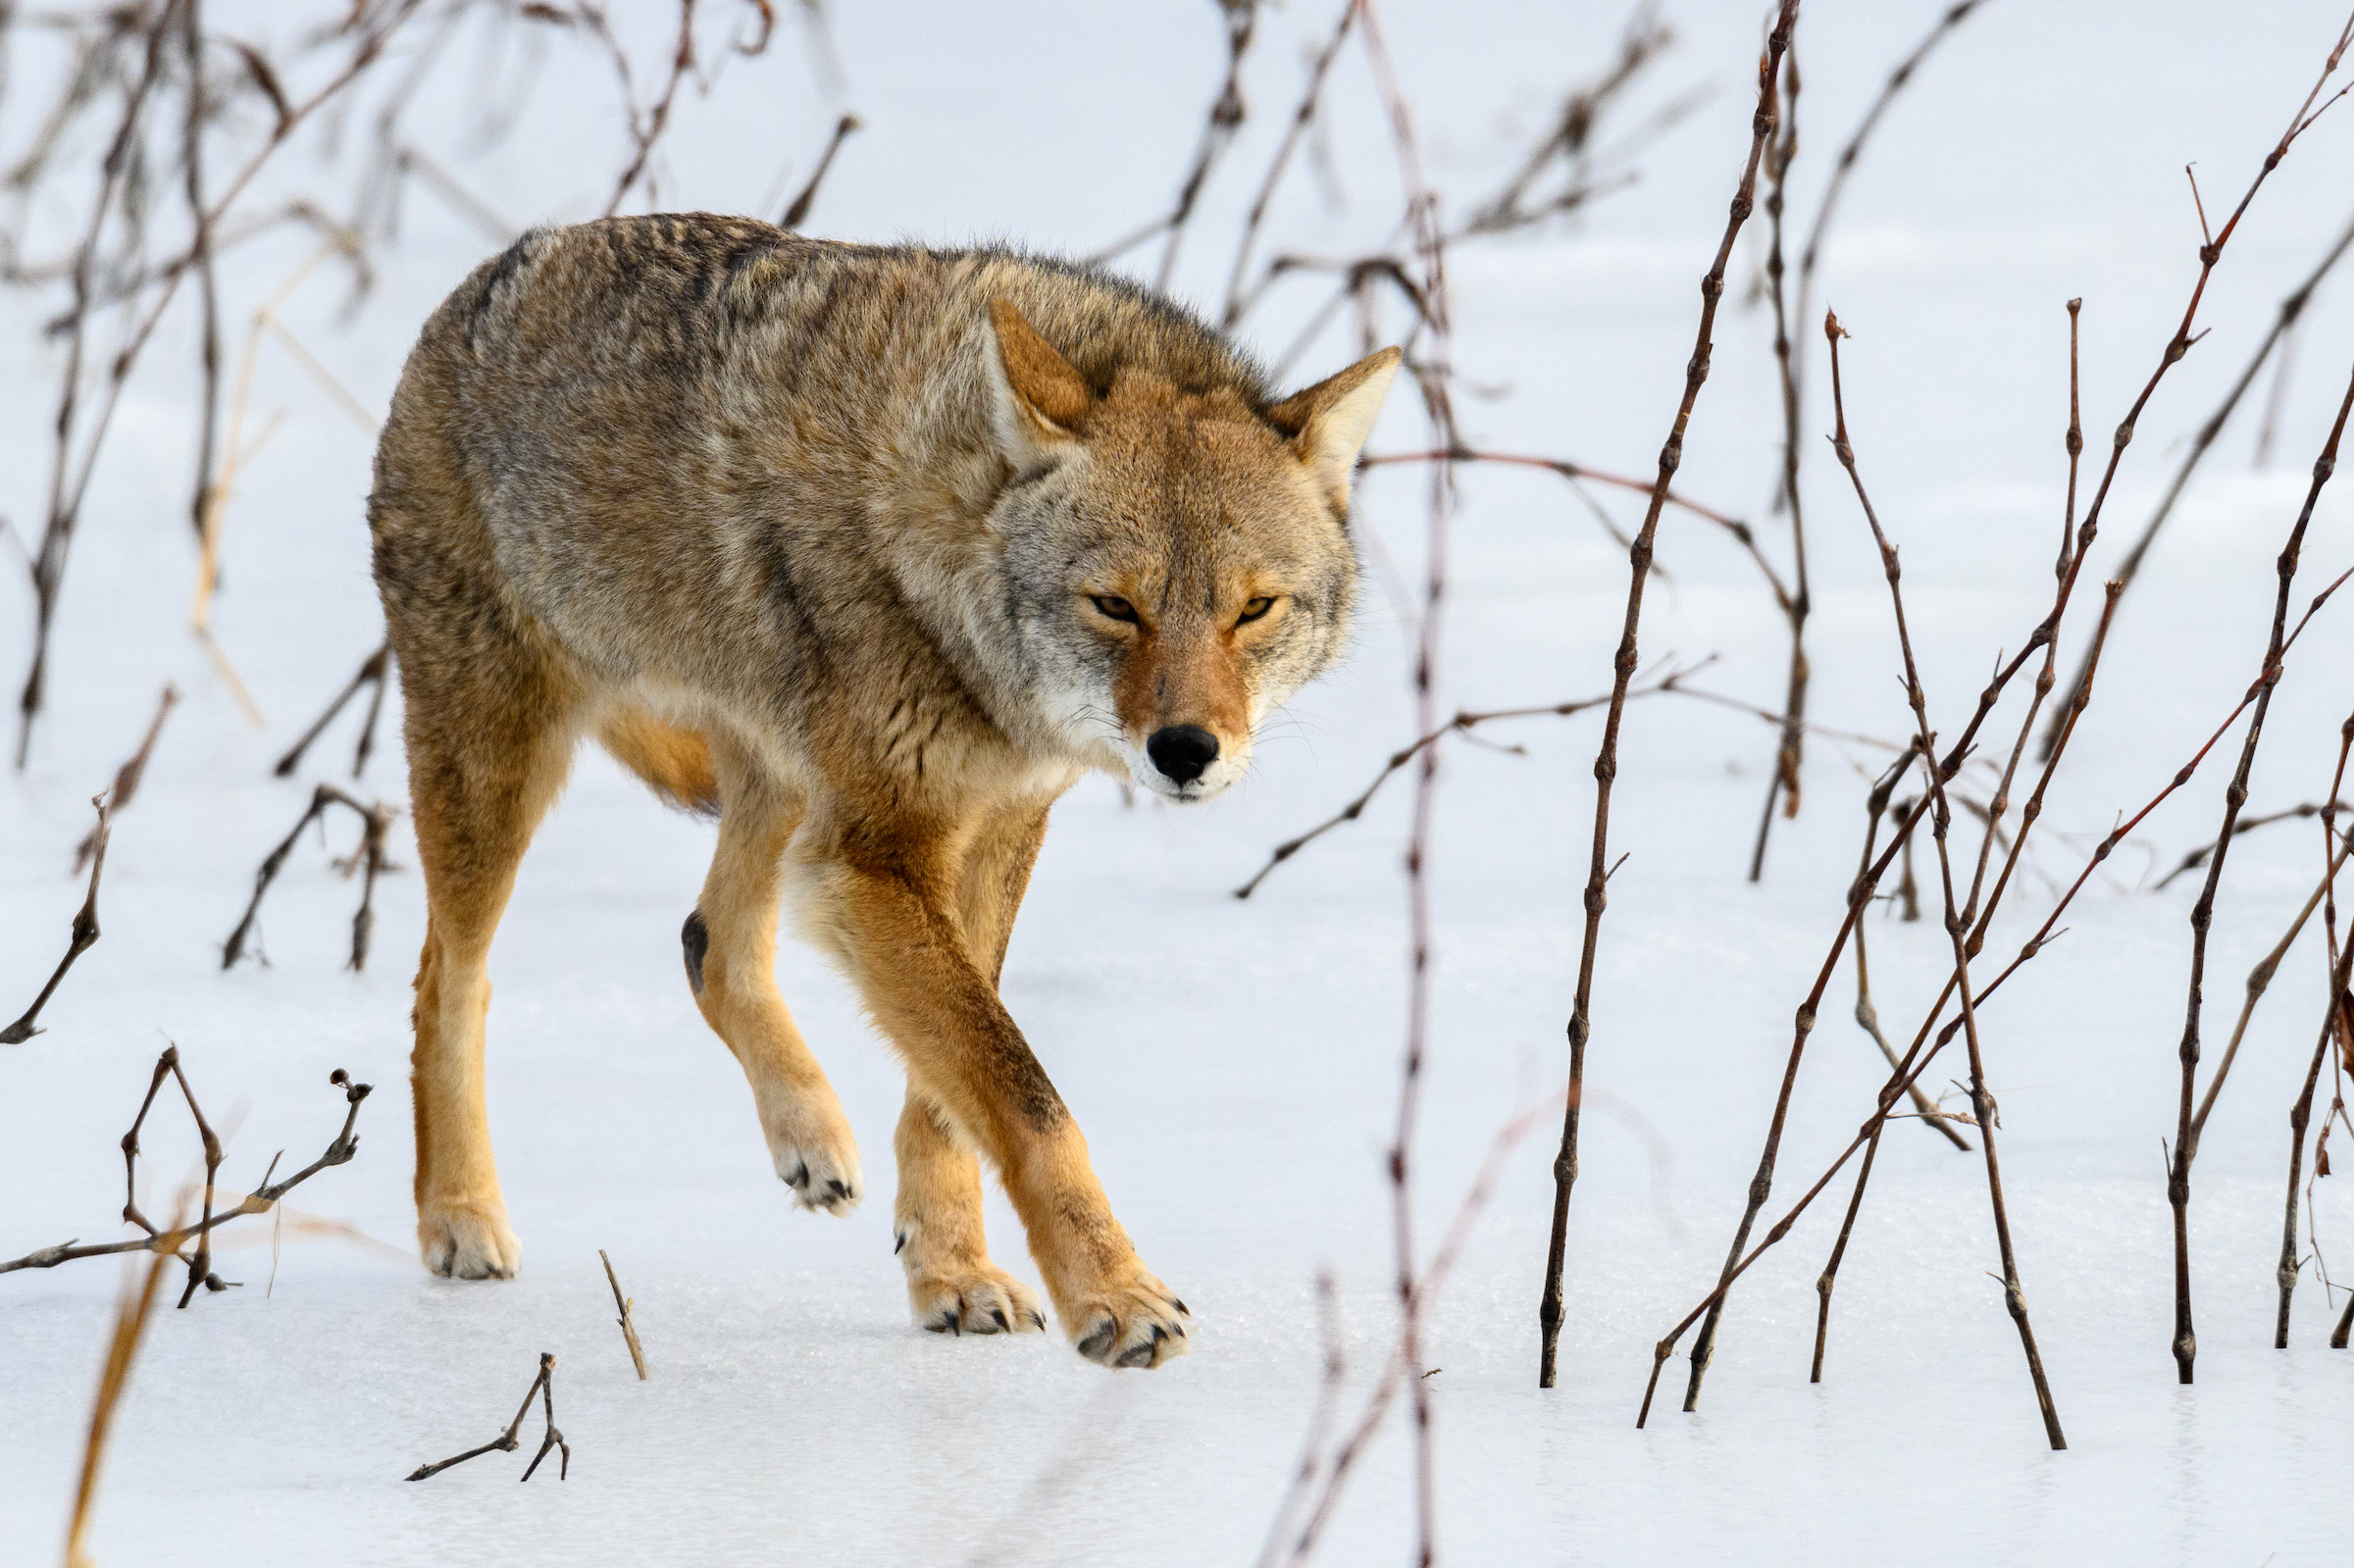 An injured coyote makes his way across the frozen and snow covered pond of the Snow Goose Complex at Loess Bluffs NWR (formerly known as Squaw Creek). Loess Bluffs is a wildlife refuge managed by the U.S. Fish and Wildlife Service. The 700-acre refuge, located in northwest Missouri is known for the migrating waterfowl, particularly Snow Geese. Fall and Spring migration can bring millions of Snow Geese to the refuge. Also, bald eagles and an occasional golden eagle pass through the area during the fall and winter months. 

The 10-mile auto tour around the waterways and marshes of the refuge is an excellent way to spot birds of prey, waterfowl, beavers, otters, and muskrats.